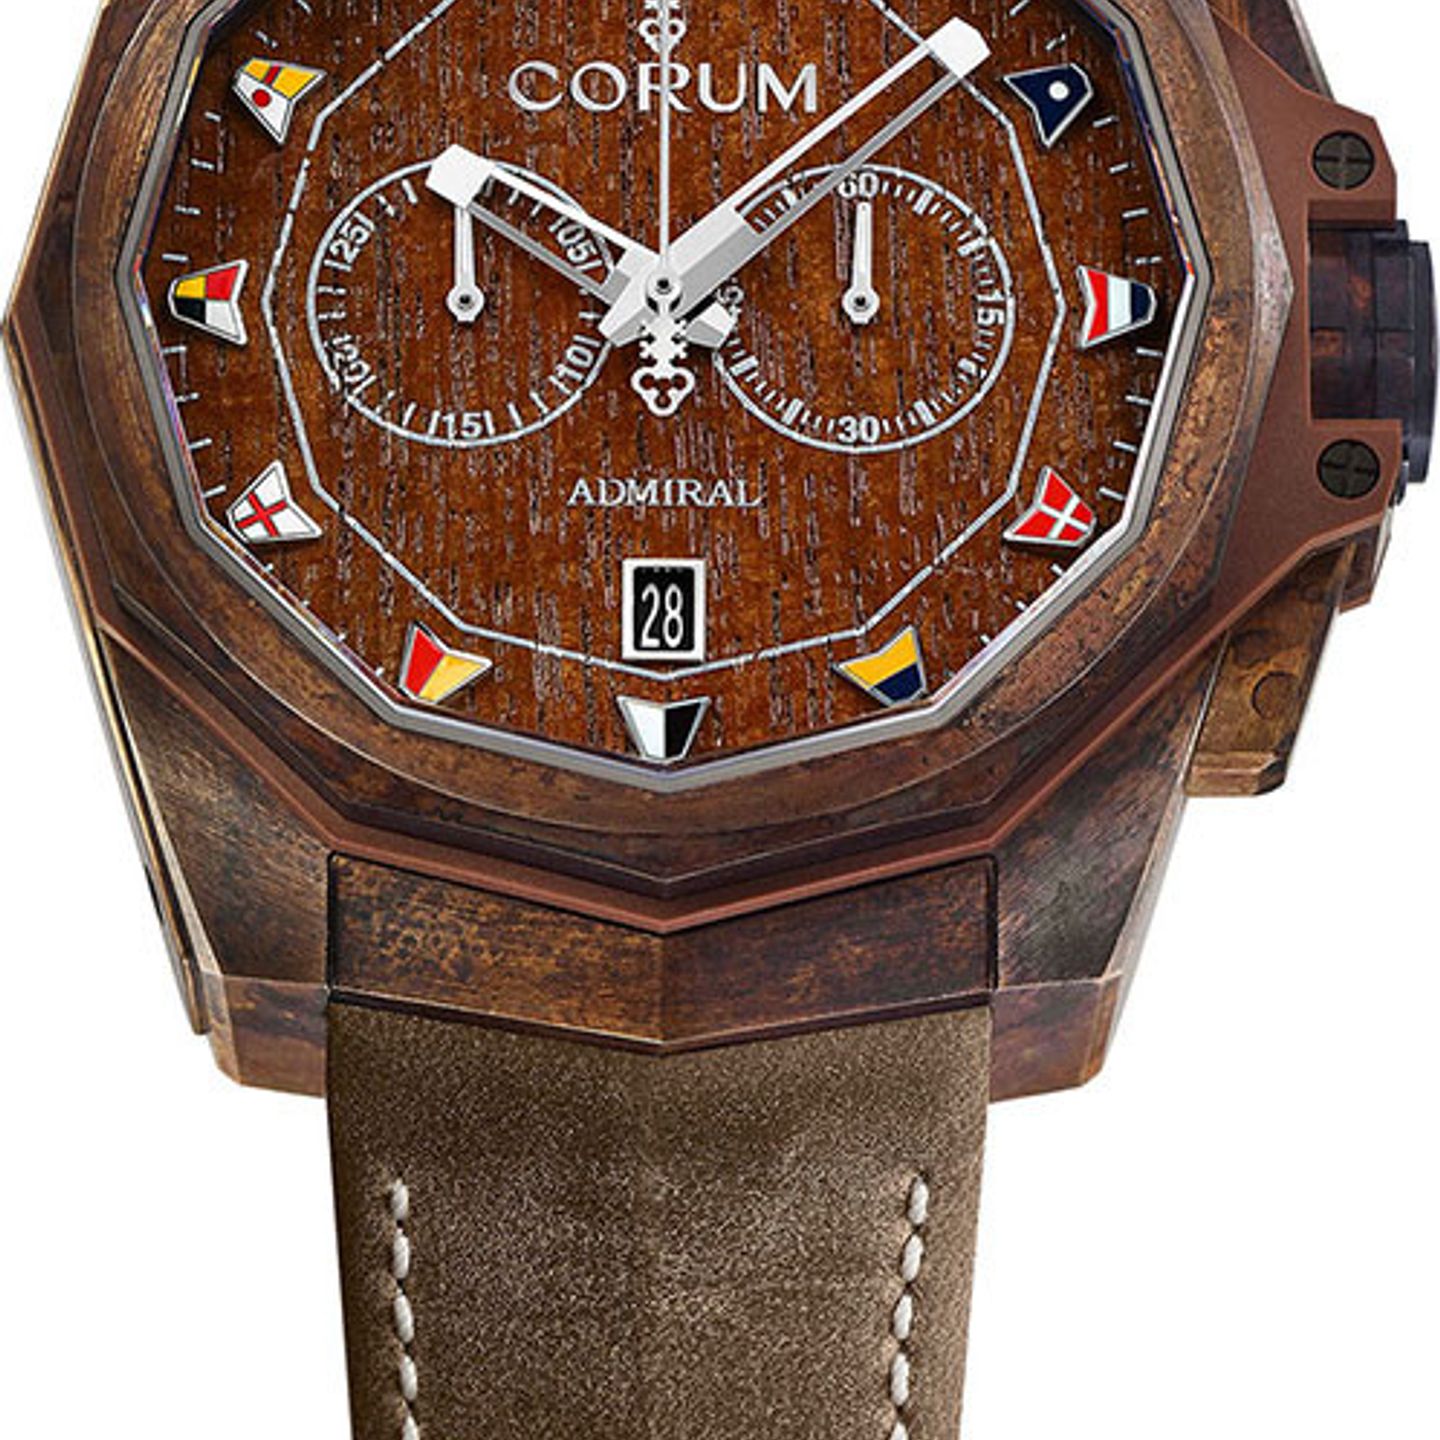 Corum Admiral's Cup 116.200.53/0F62 AW01 - (1/1)